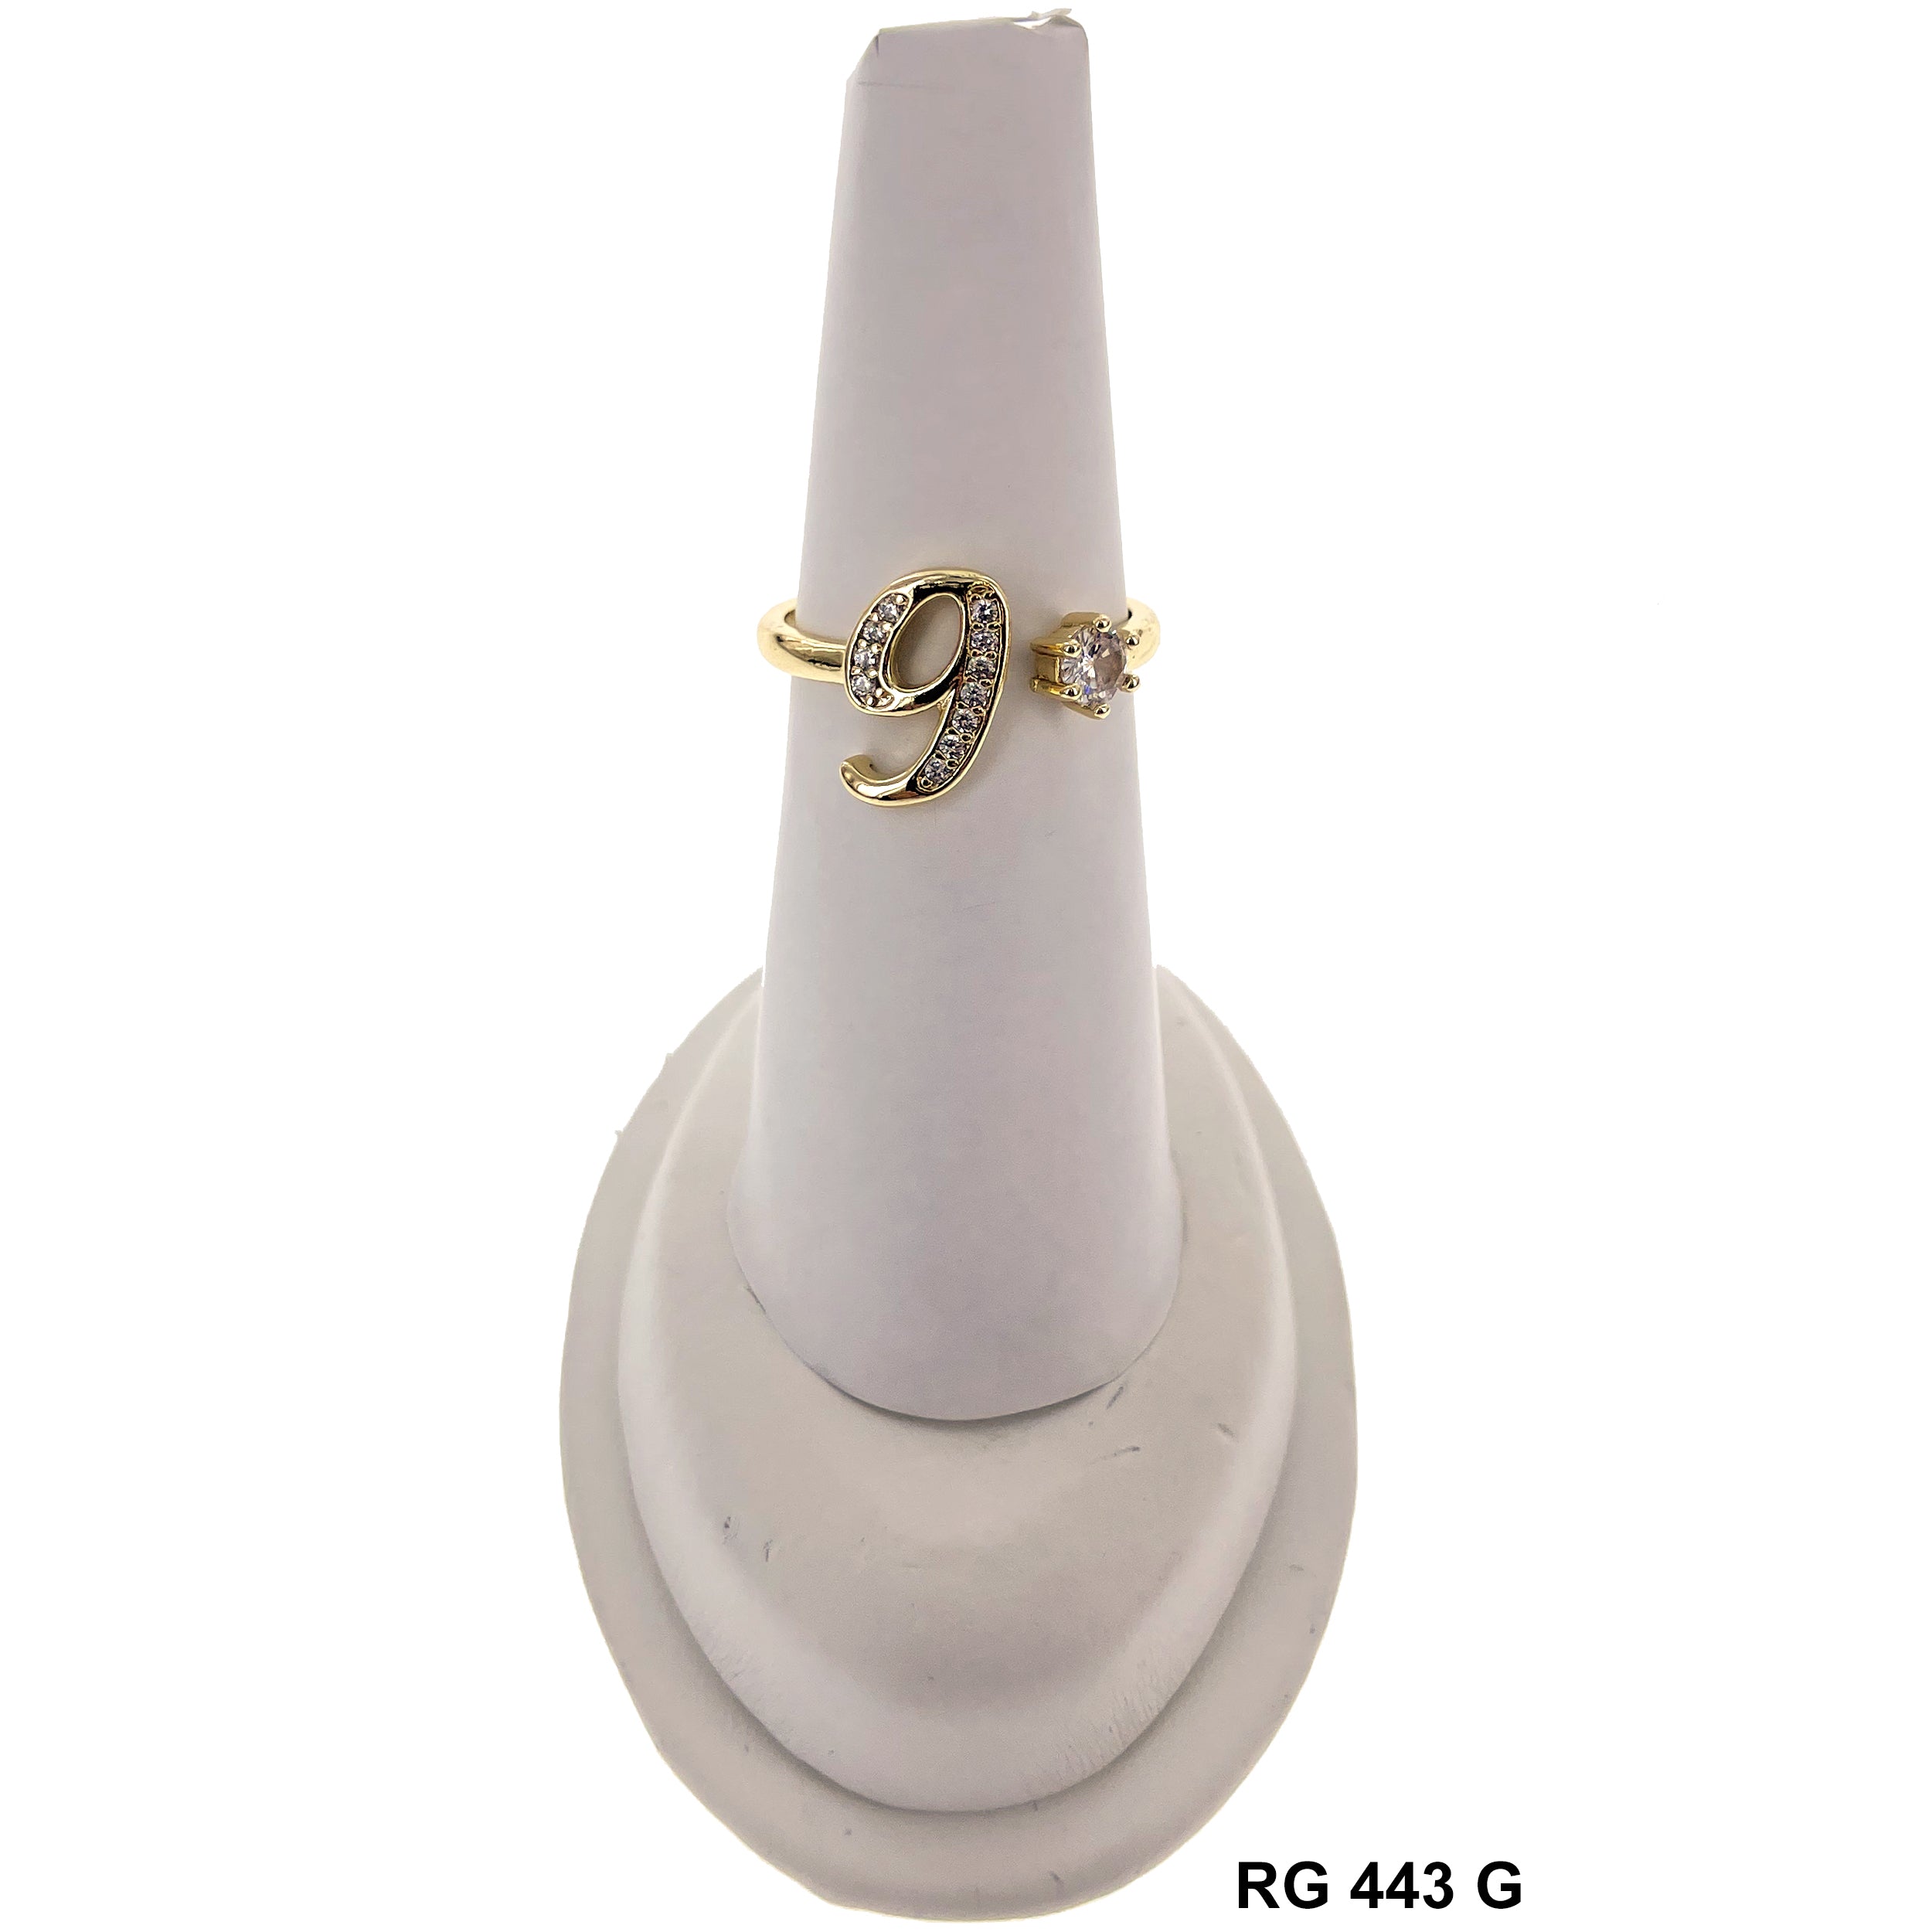 Initial Adjustable Ring RG 443 G